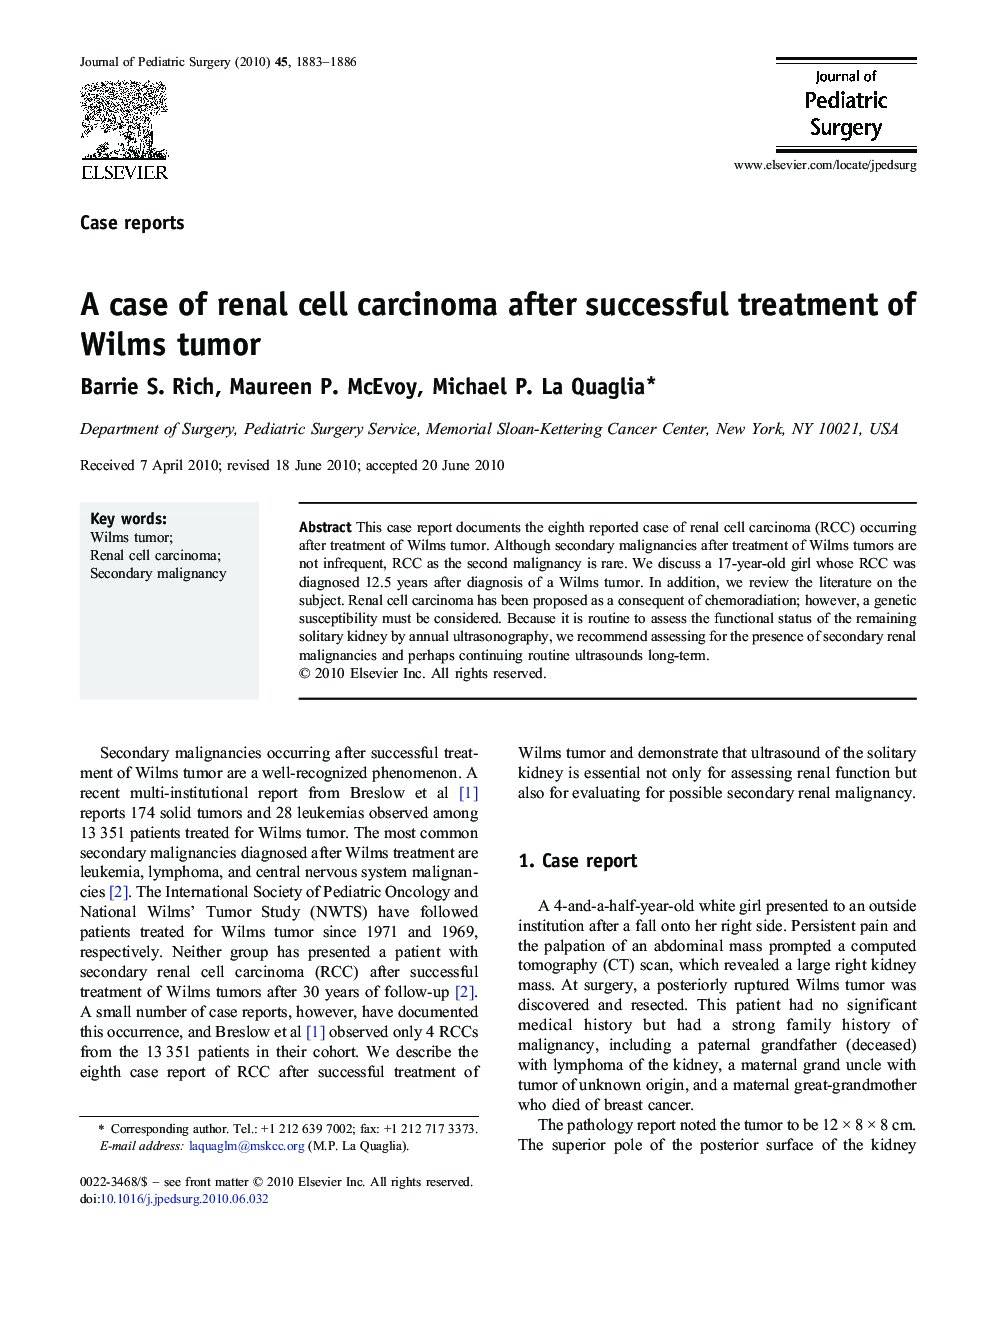 A case of renal cell carcinoma after successful treatment of Wilms tumor